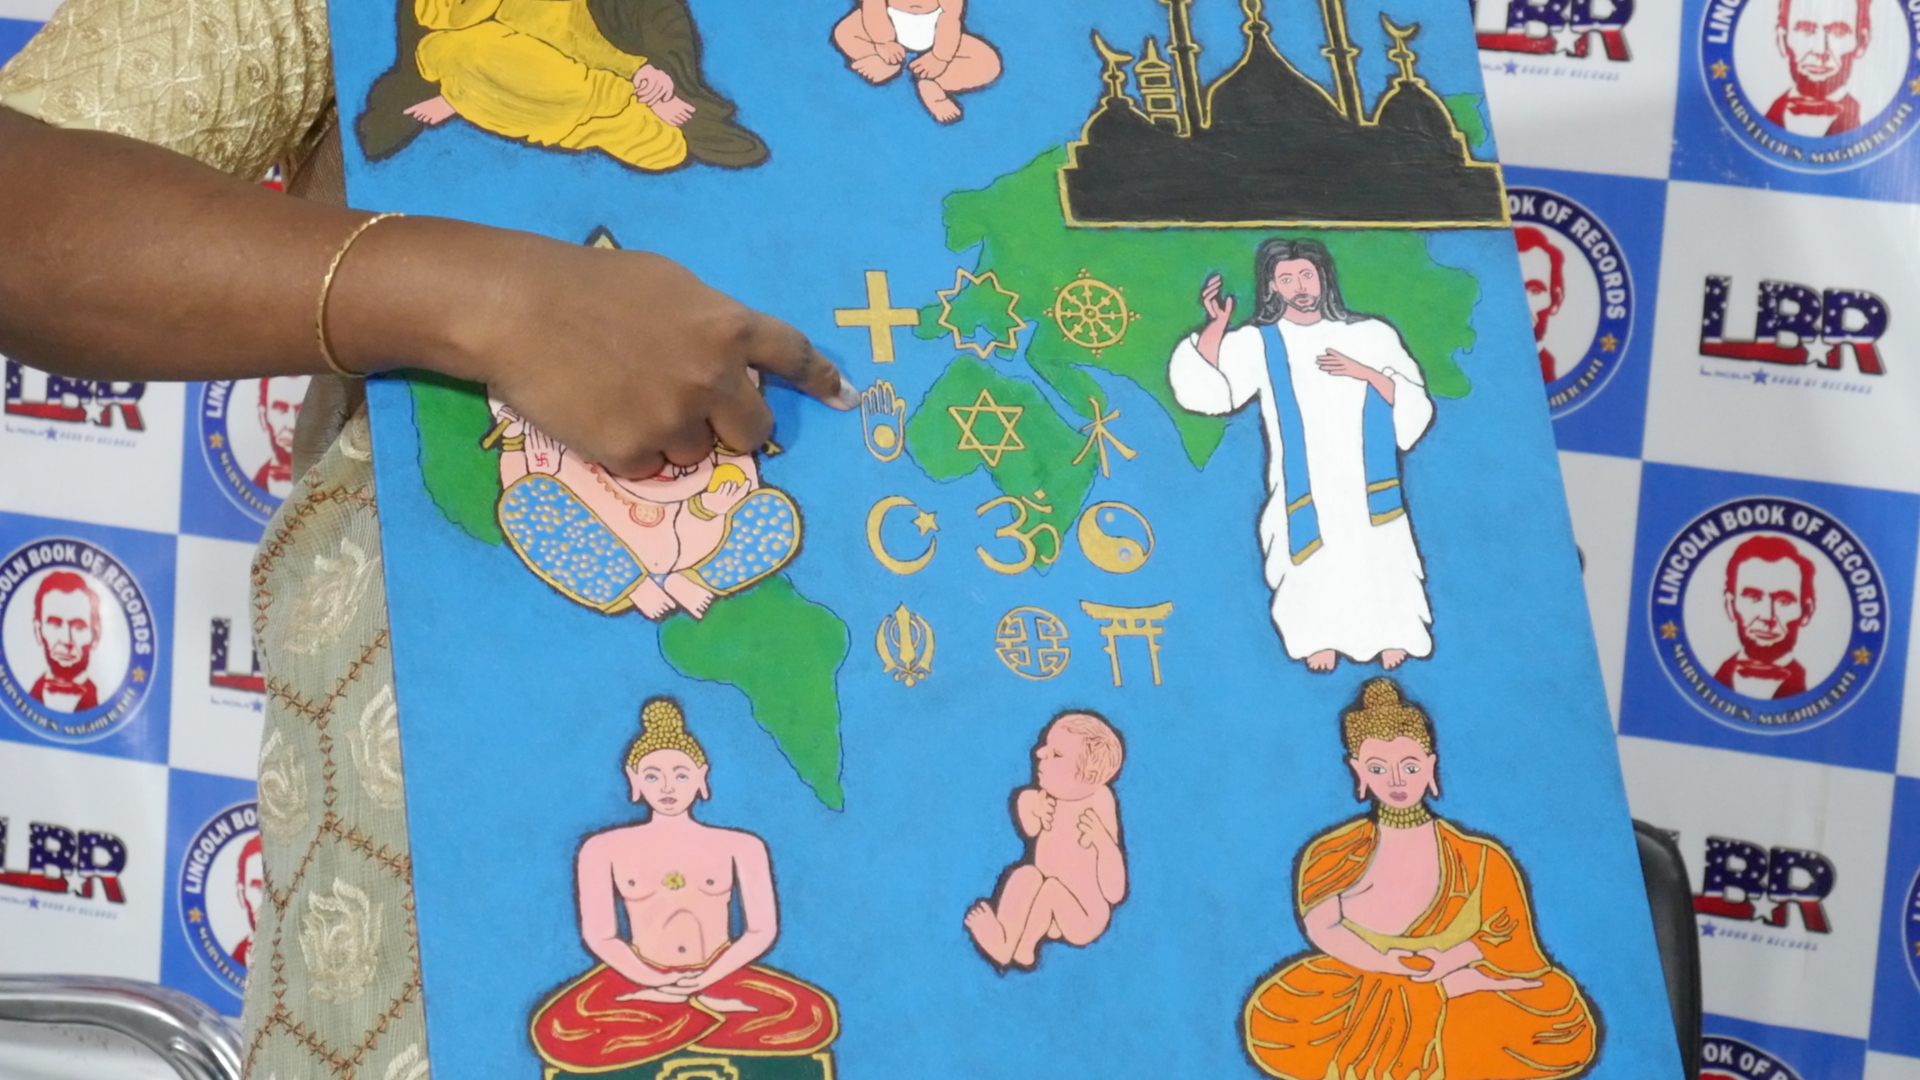 Awareness Canvas painting about Humanity and Religious Reconciliation in 24 hours